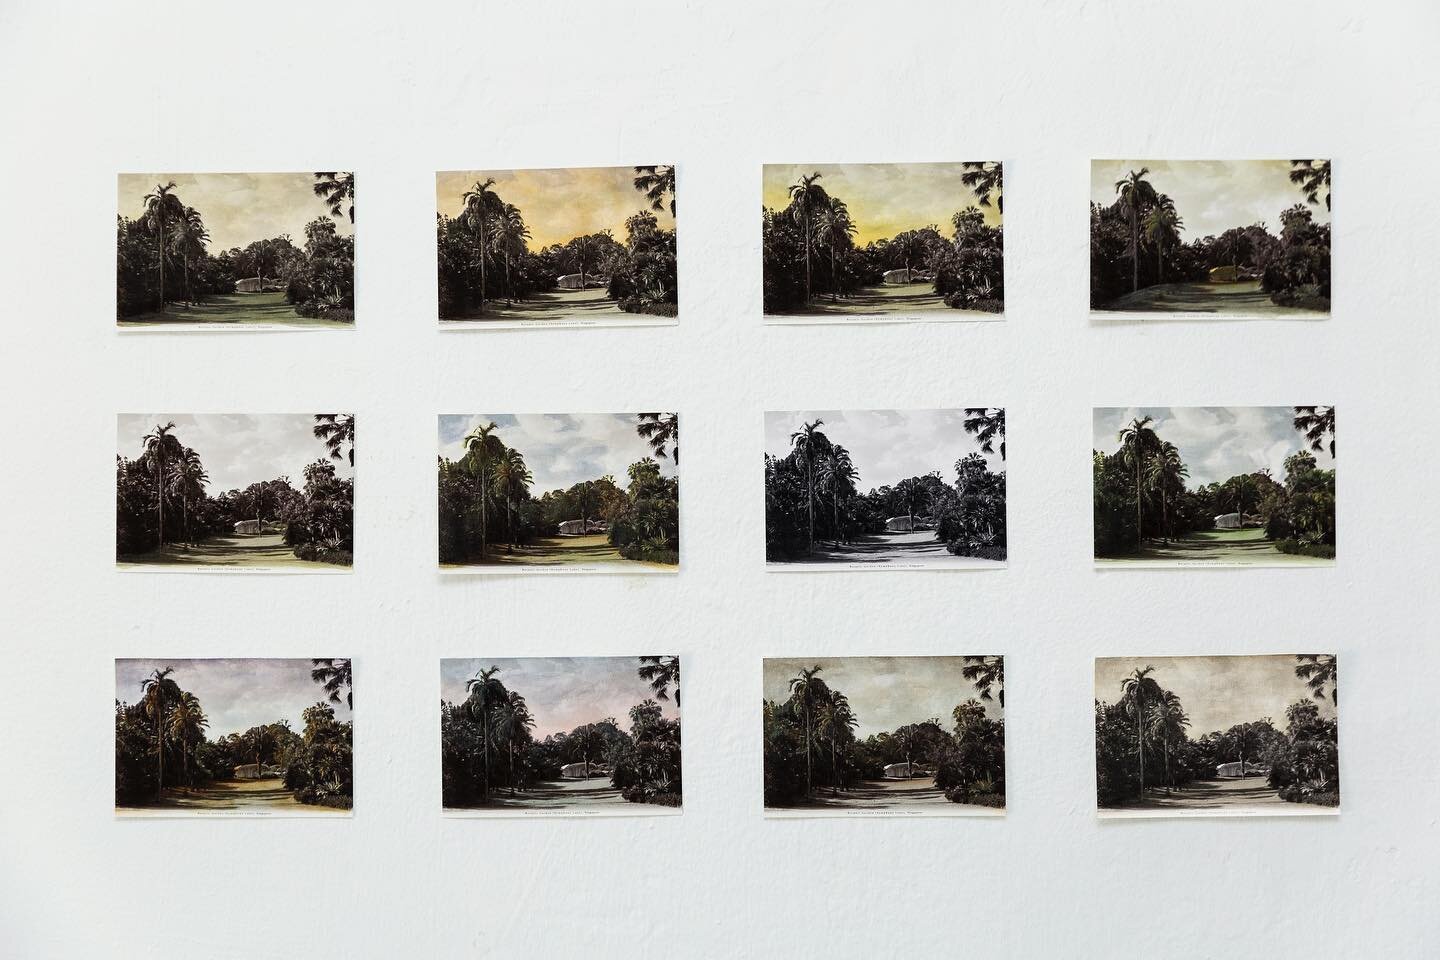 &lsquo;Botanic Garden (Symphony Lake - 12 Phases)&rsquo; reimagines 12 scenes of the site in these times of social distancing. 

Referencing the traditions of hand-tinted postcards popular in the 1900s, the work mimics images made by postcard colouri